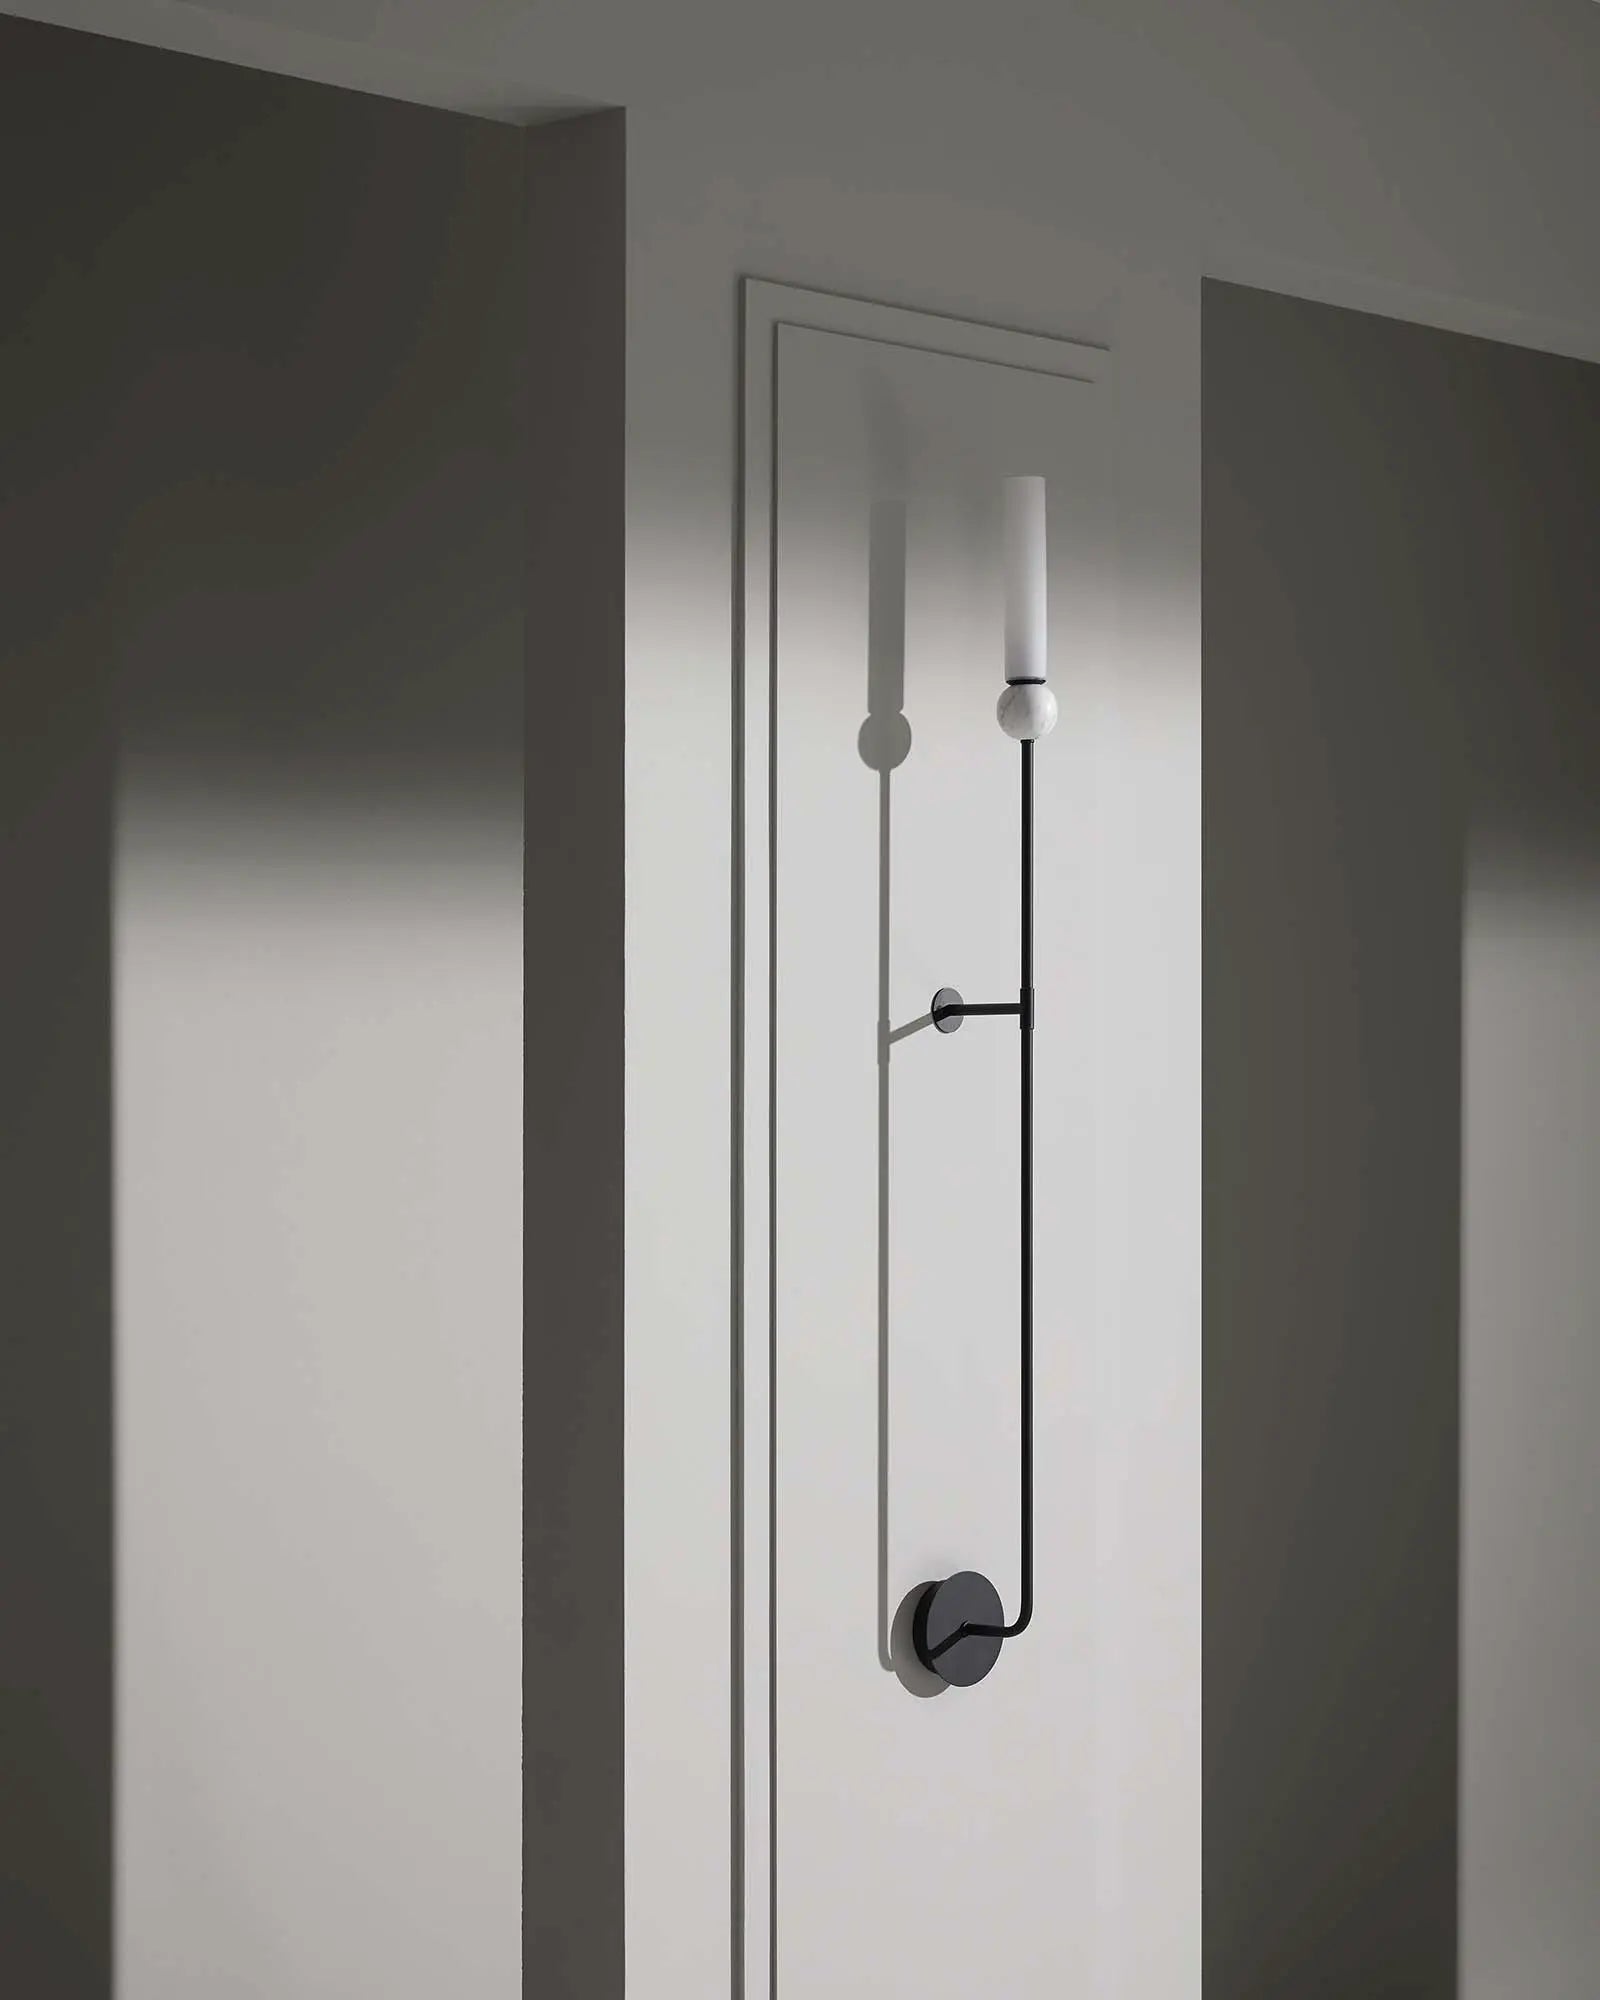 Delie Long wall light with marble sphere and cylindrical opal shade in hallway